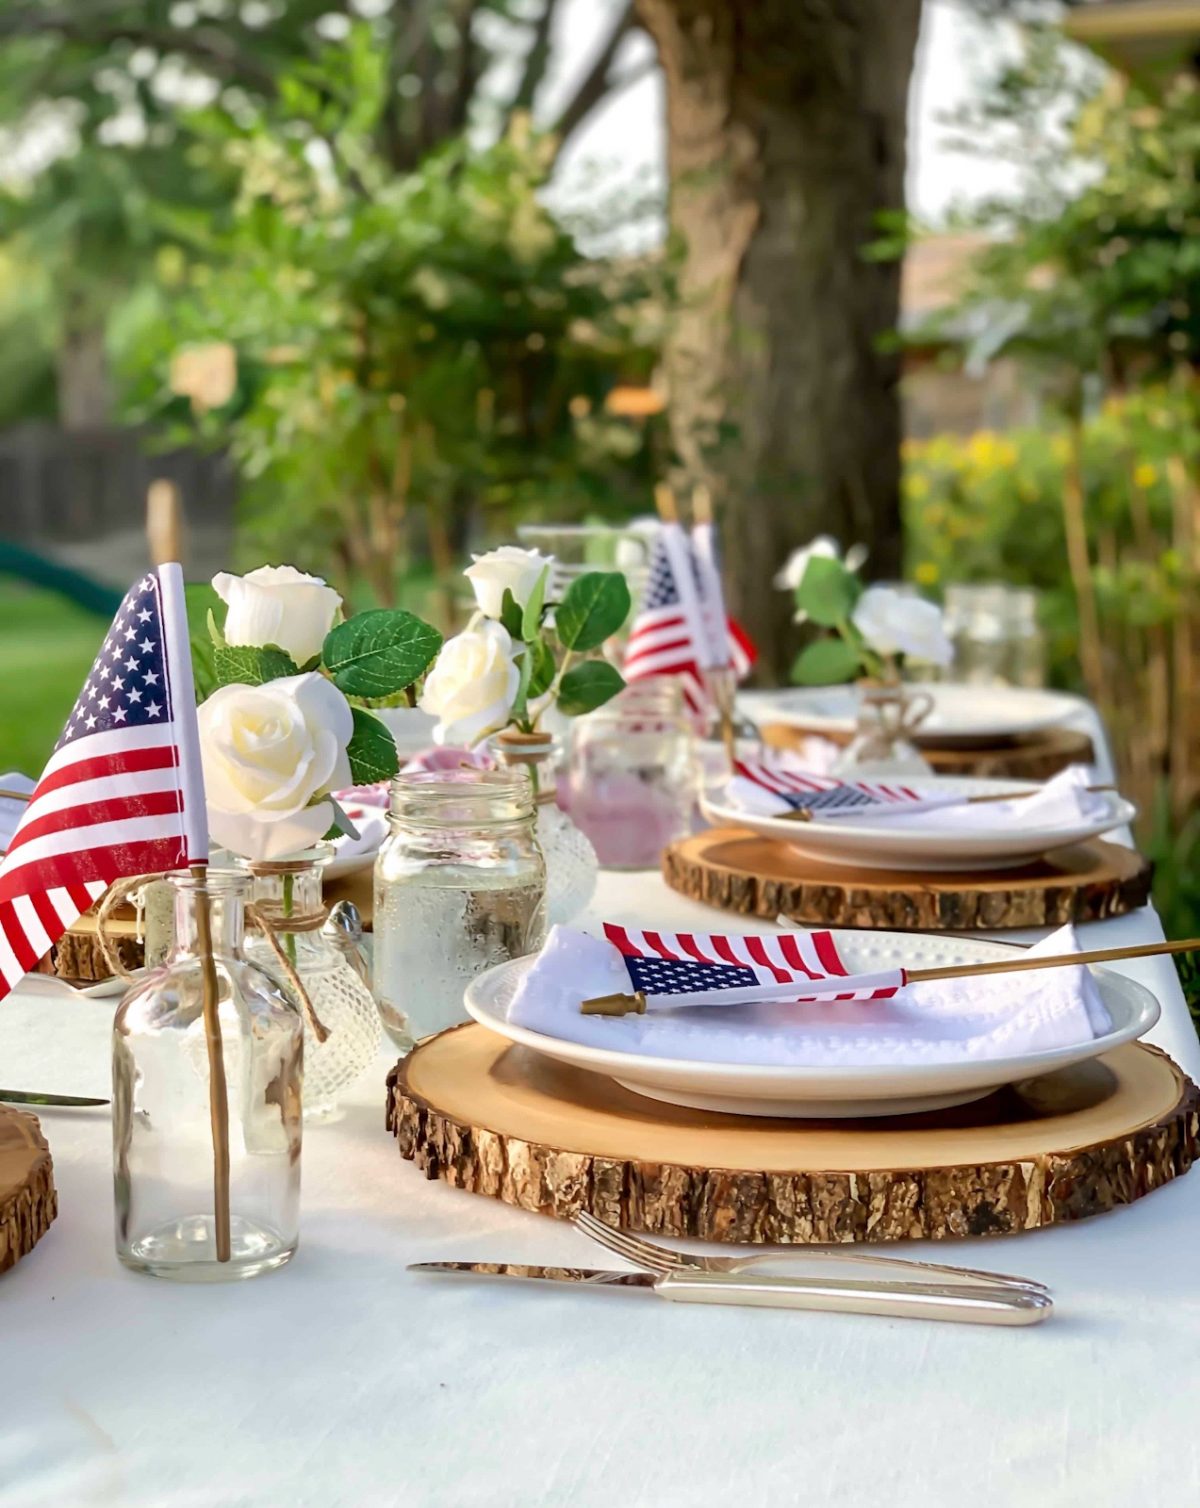 An outdoor patriotic table setting.